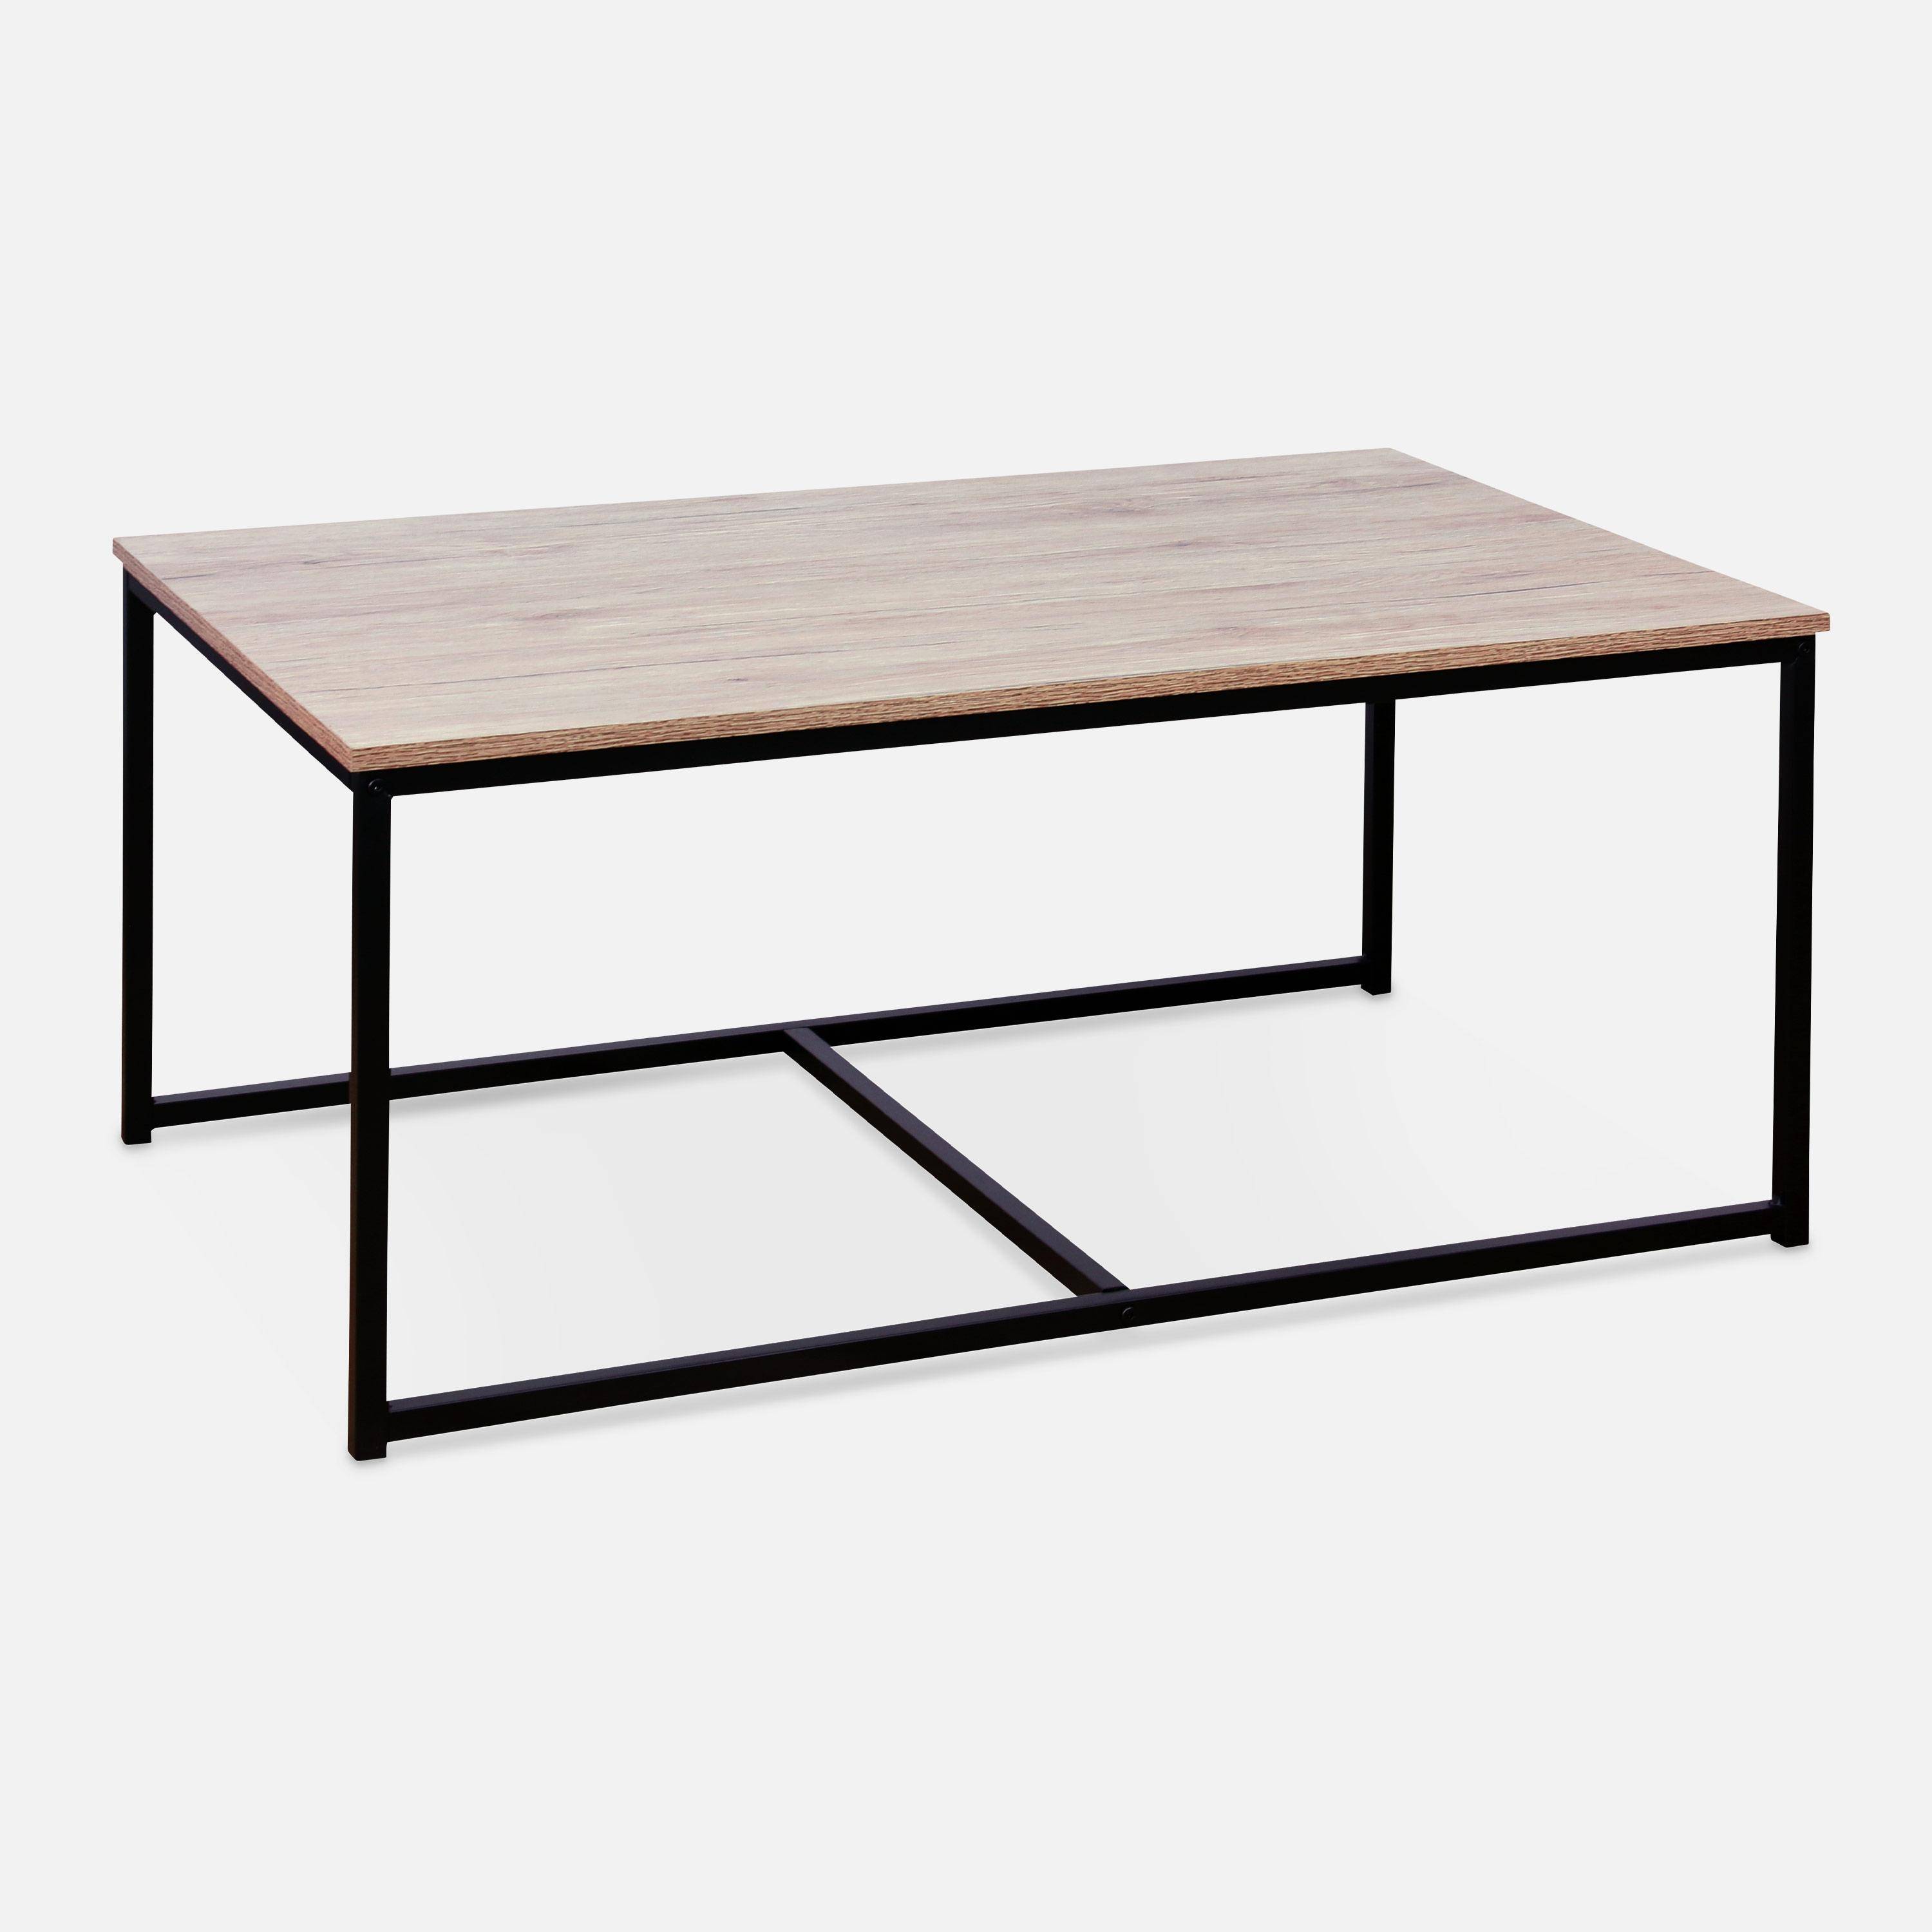 Set of 3 metal and wood-effect nesting tables, large table 100x60x45cm, 2x small tables 50x50x38cm - Loft - Black Photo6